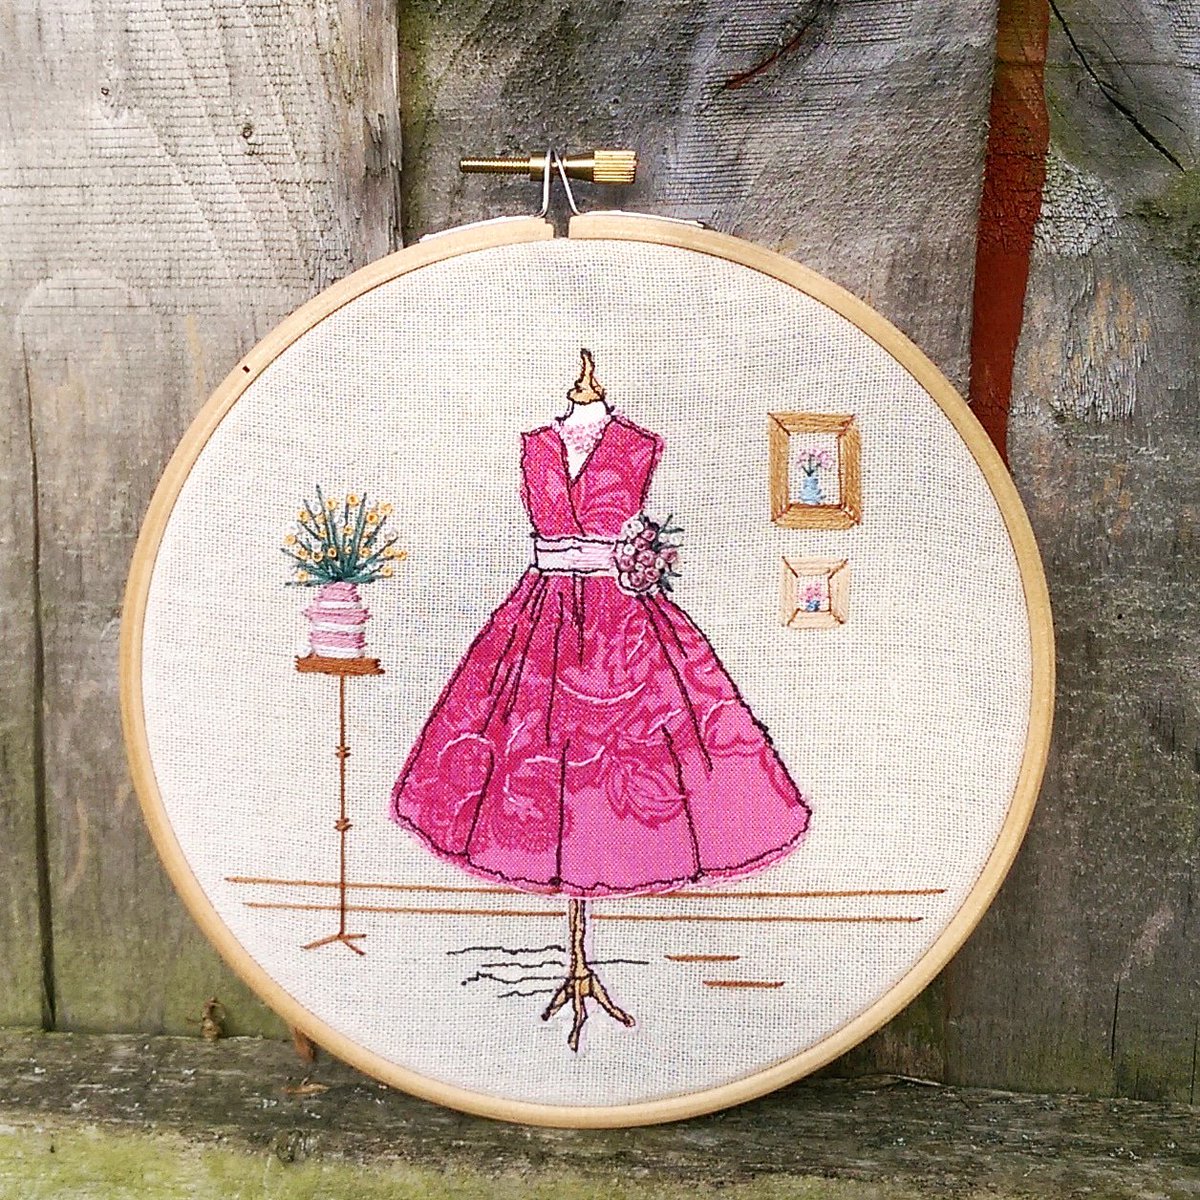 Here's my second Dress Shop freemotion machine embroidery, celebration my love of all things miniature & made from fabric. Single thread French knots too in my #etsyshop #HandmadeHour  #glamour #CHANELHauteCouture #50style #50slook #fashioninspo #etsyseller #lillyblossom